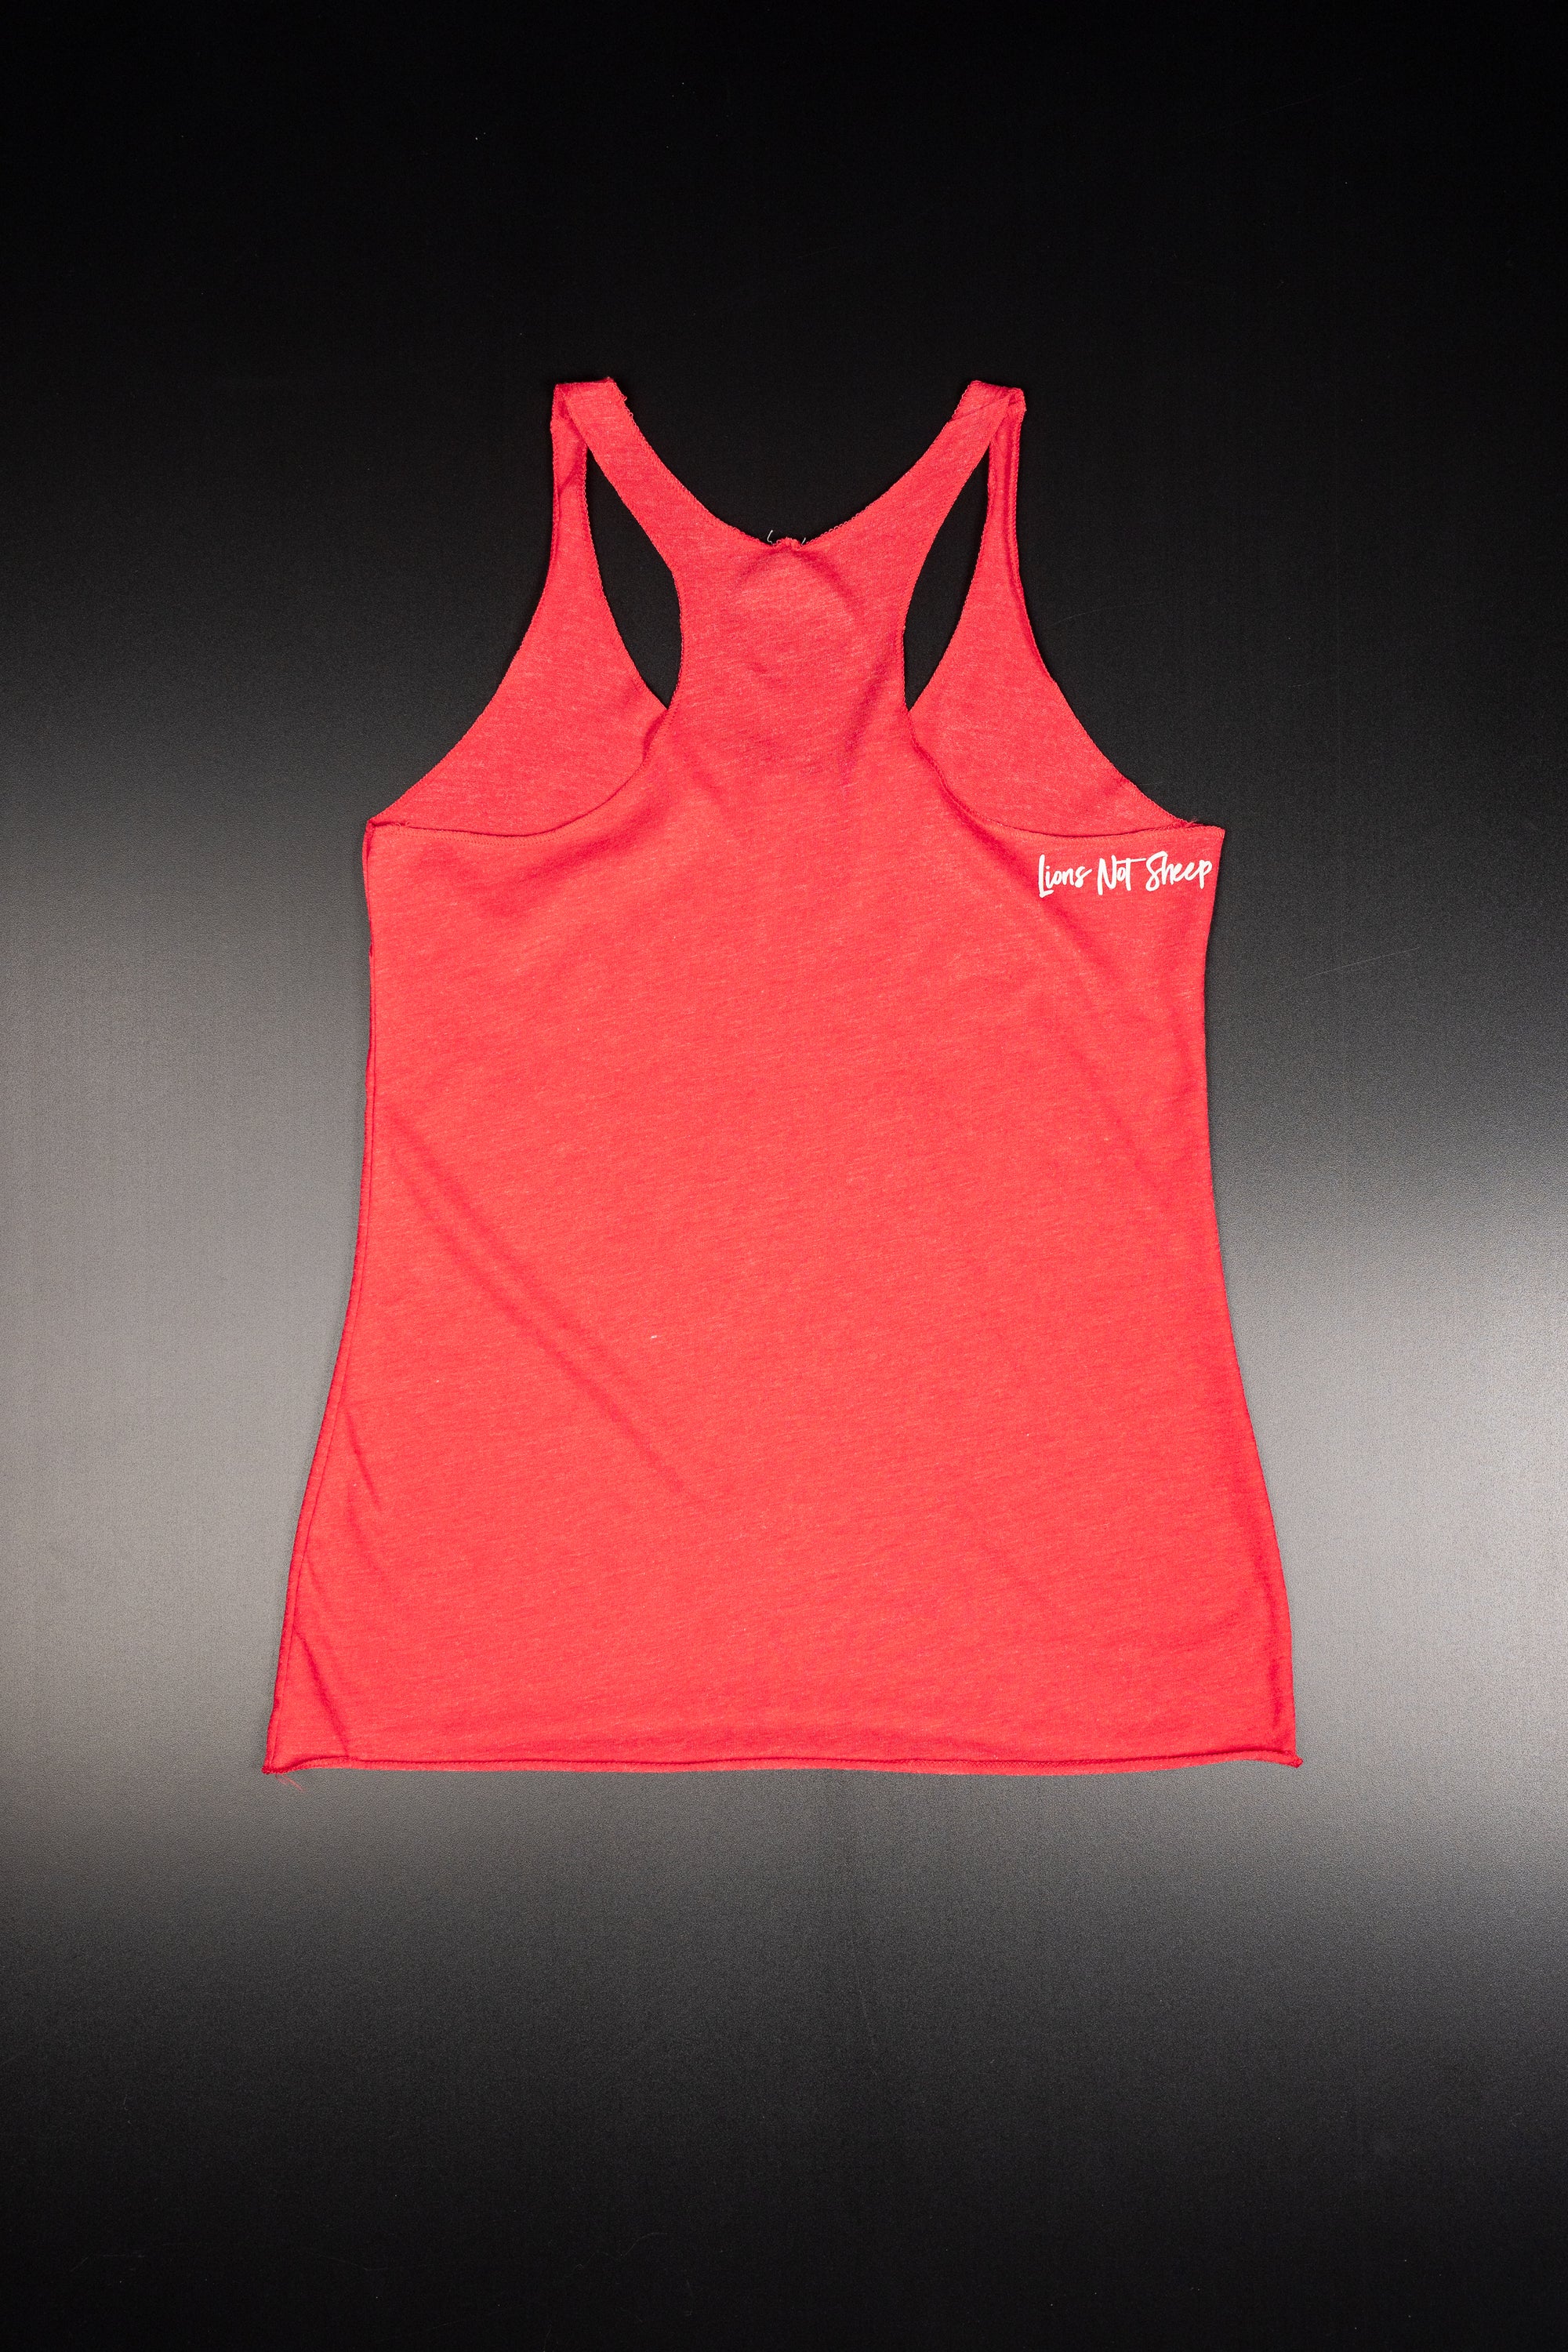 Queen Women's Tank (Vintage Red) - Lions Not Sheep ®